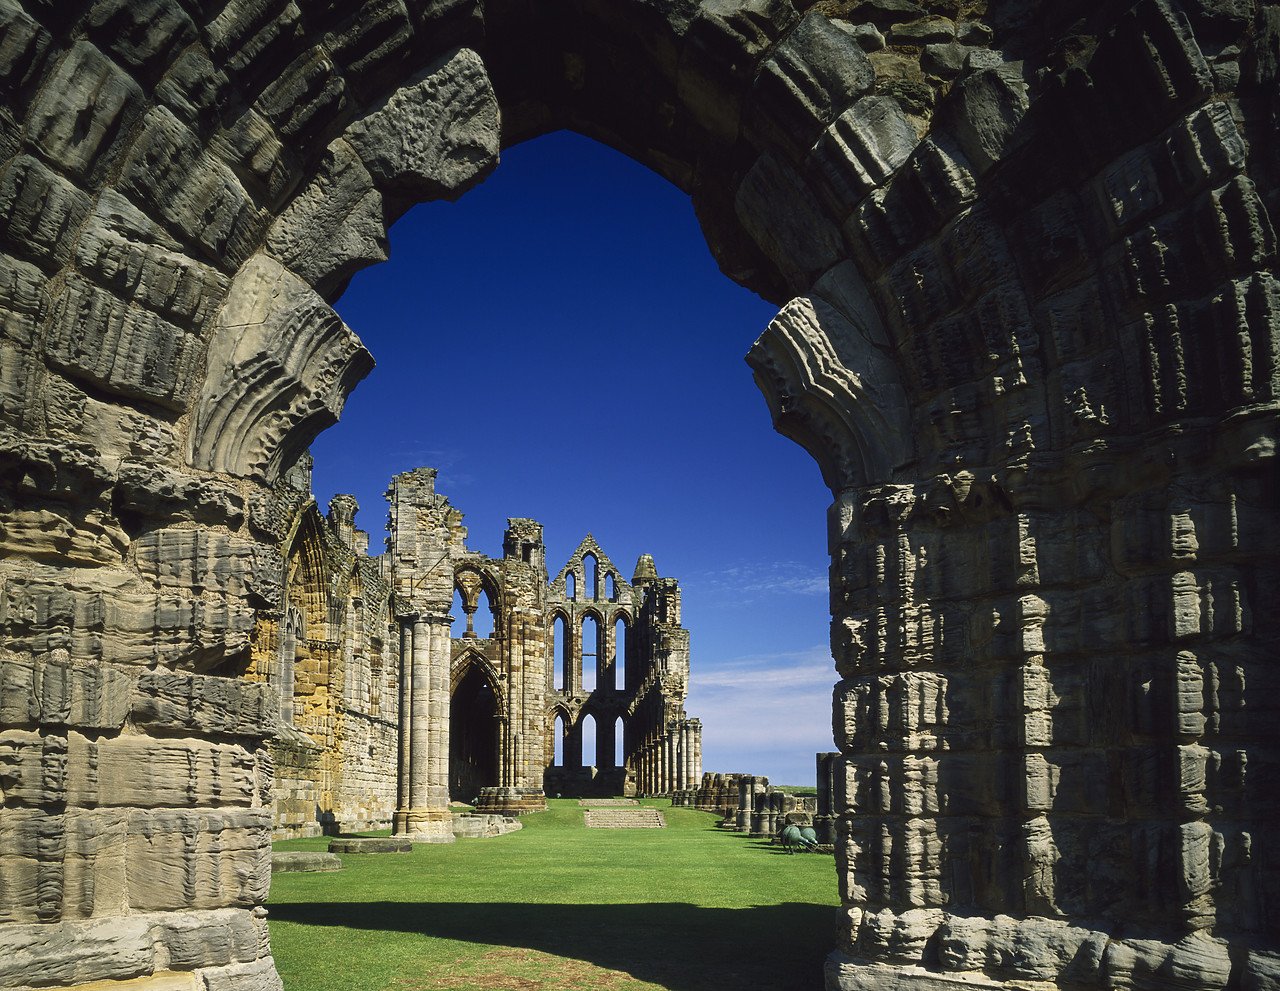 #881467-1 - Whitby Abbey, North Yorkshire, England